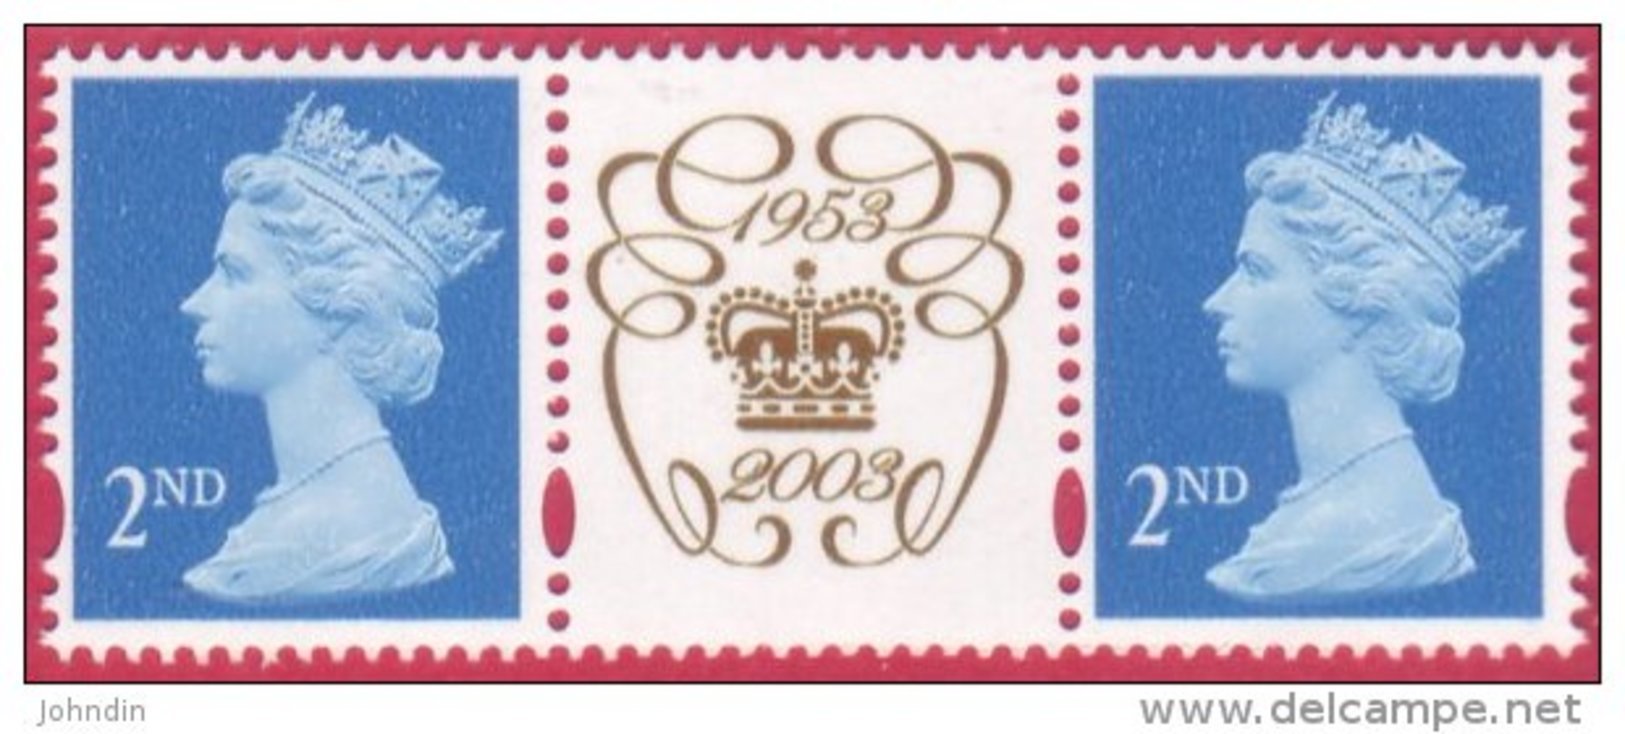 2003 GB Machin Strip - NVI's 2nd Class - Label In The Middle With Crown Design - 2nd Class UM/ MNH - Machins